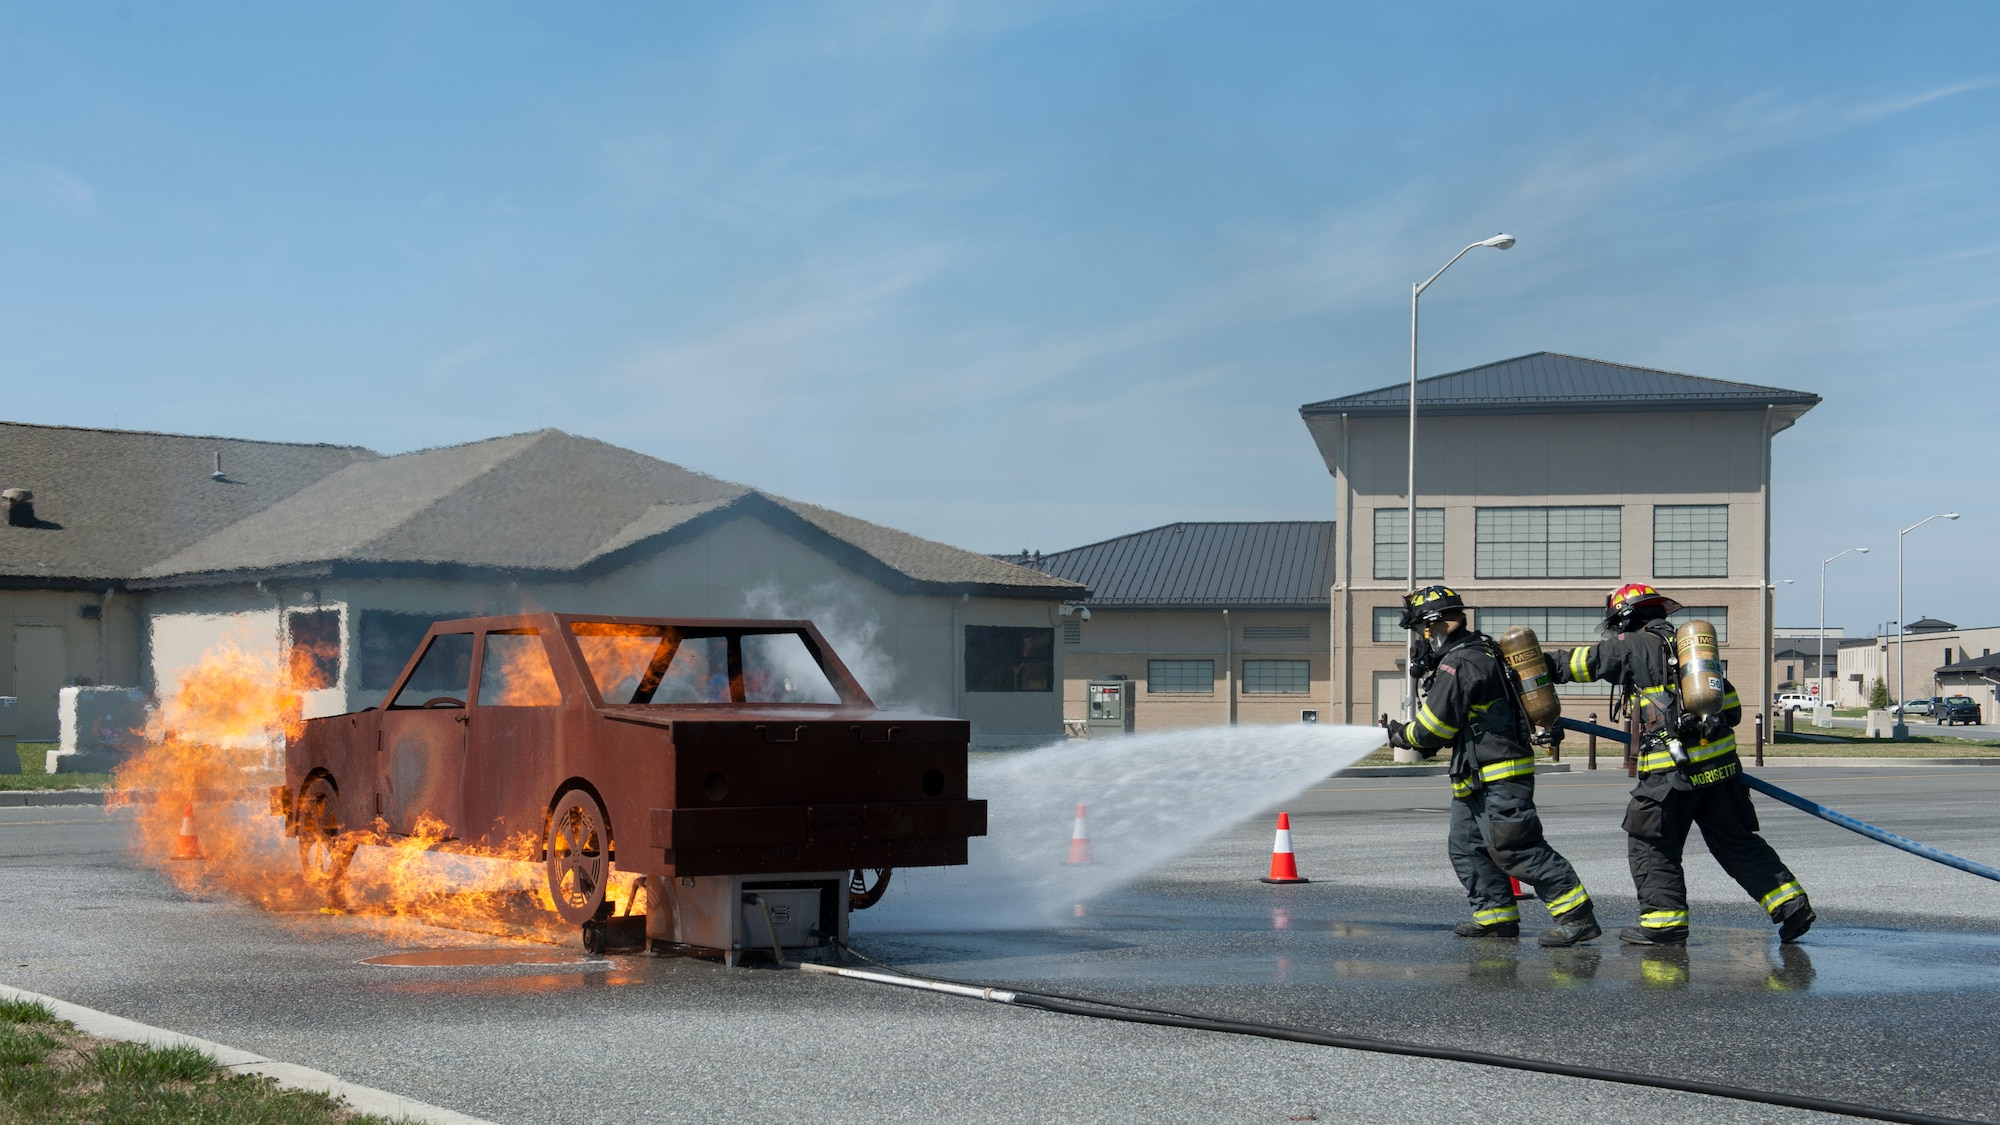 Senior Airman Chris Ladue and Tech Sgt. Scott Morisette, 436th Civil Engineer Squadron fire fighters, take part in a demonstration by putting out an automobile fire while Col. Michael Grismer, 436th Airlift Wing commander, visits the fire department March 16, 2016, on Dover Air Force Base, Del. The demonstration was used to give Grismer a better understanding of the fire department’s readiness and capabilities. (U.S. Air Force photo/Senior Airman Zachary Cacicia)